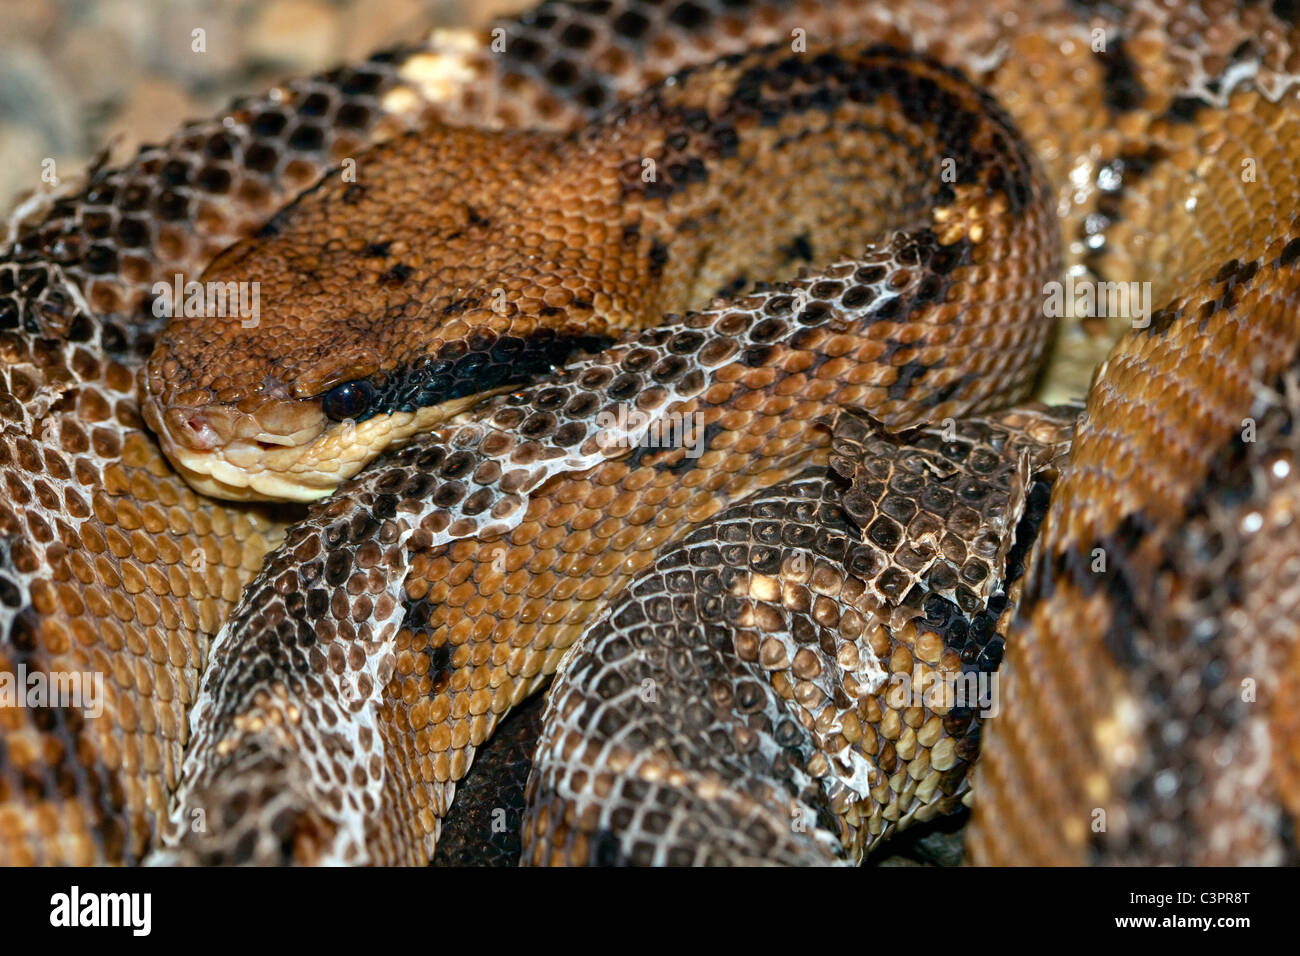 A venomous Central American bushmaster (Lachesis stenophrys) snake in Costa Rica. Stock Photo